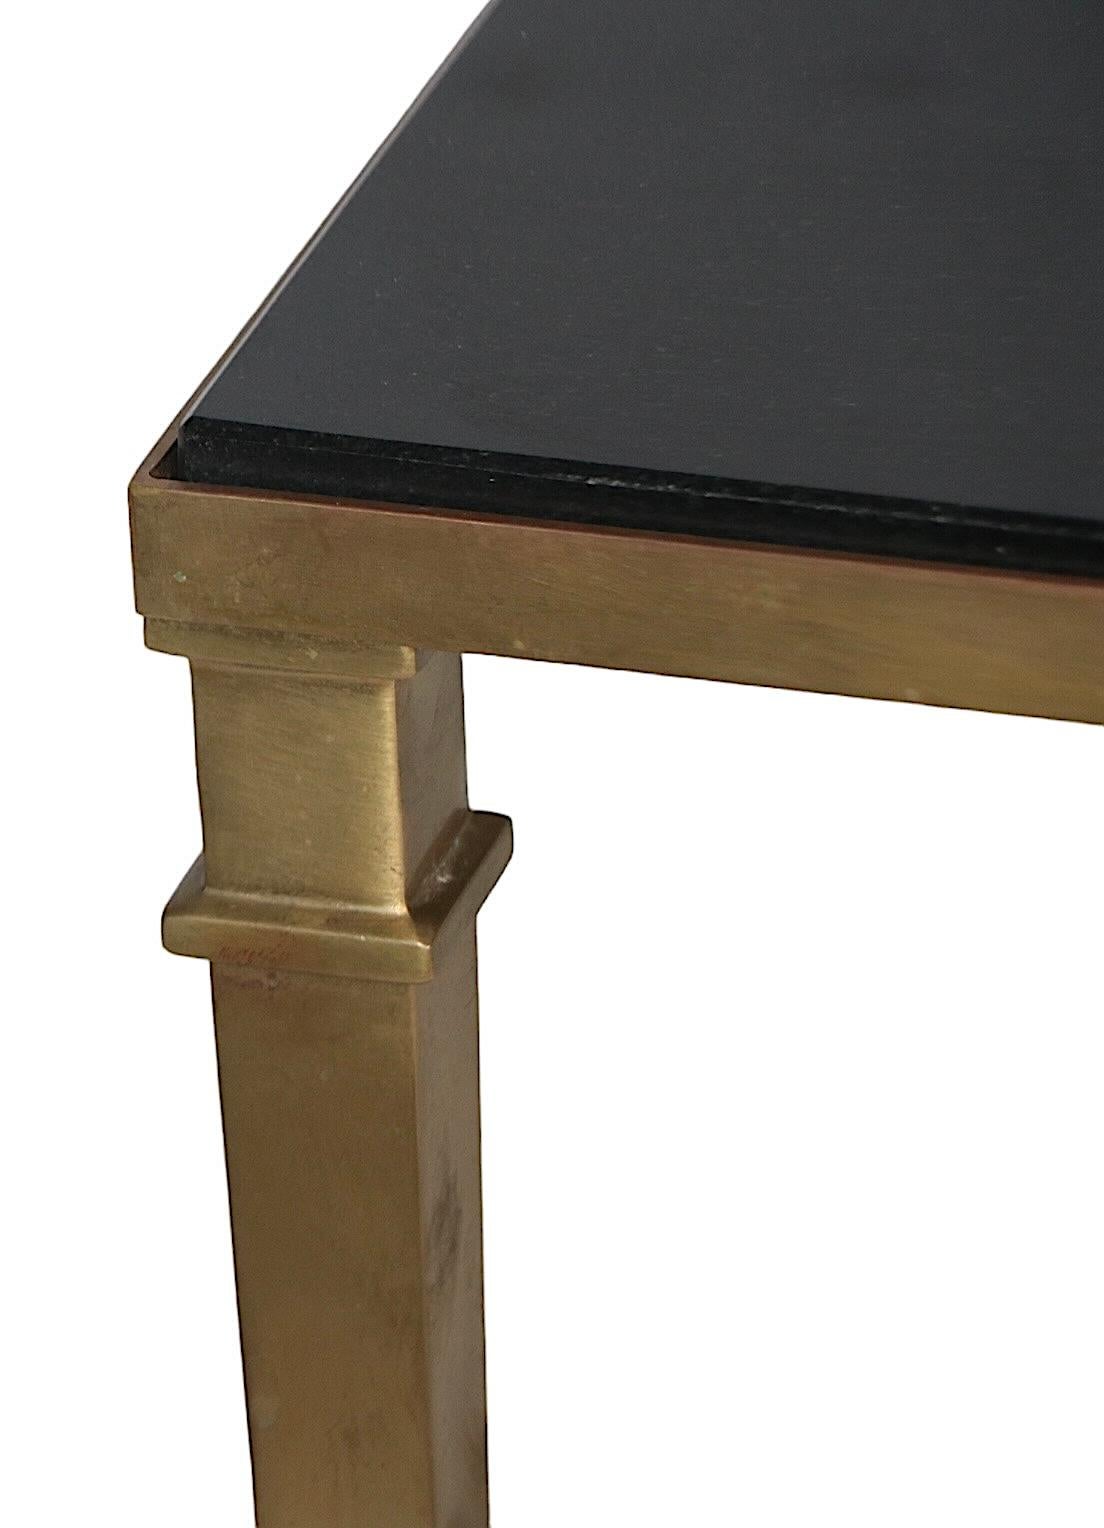 Hollywood Regency Neoclassic Style Brass and Granite Coffee Table c 1960/70's  For Sale 4